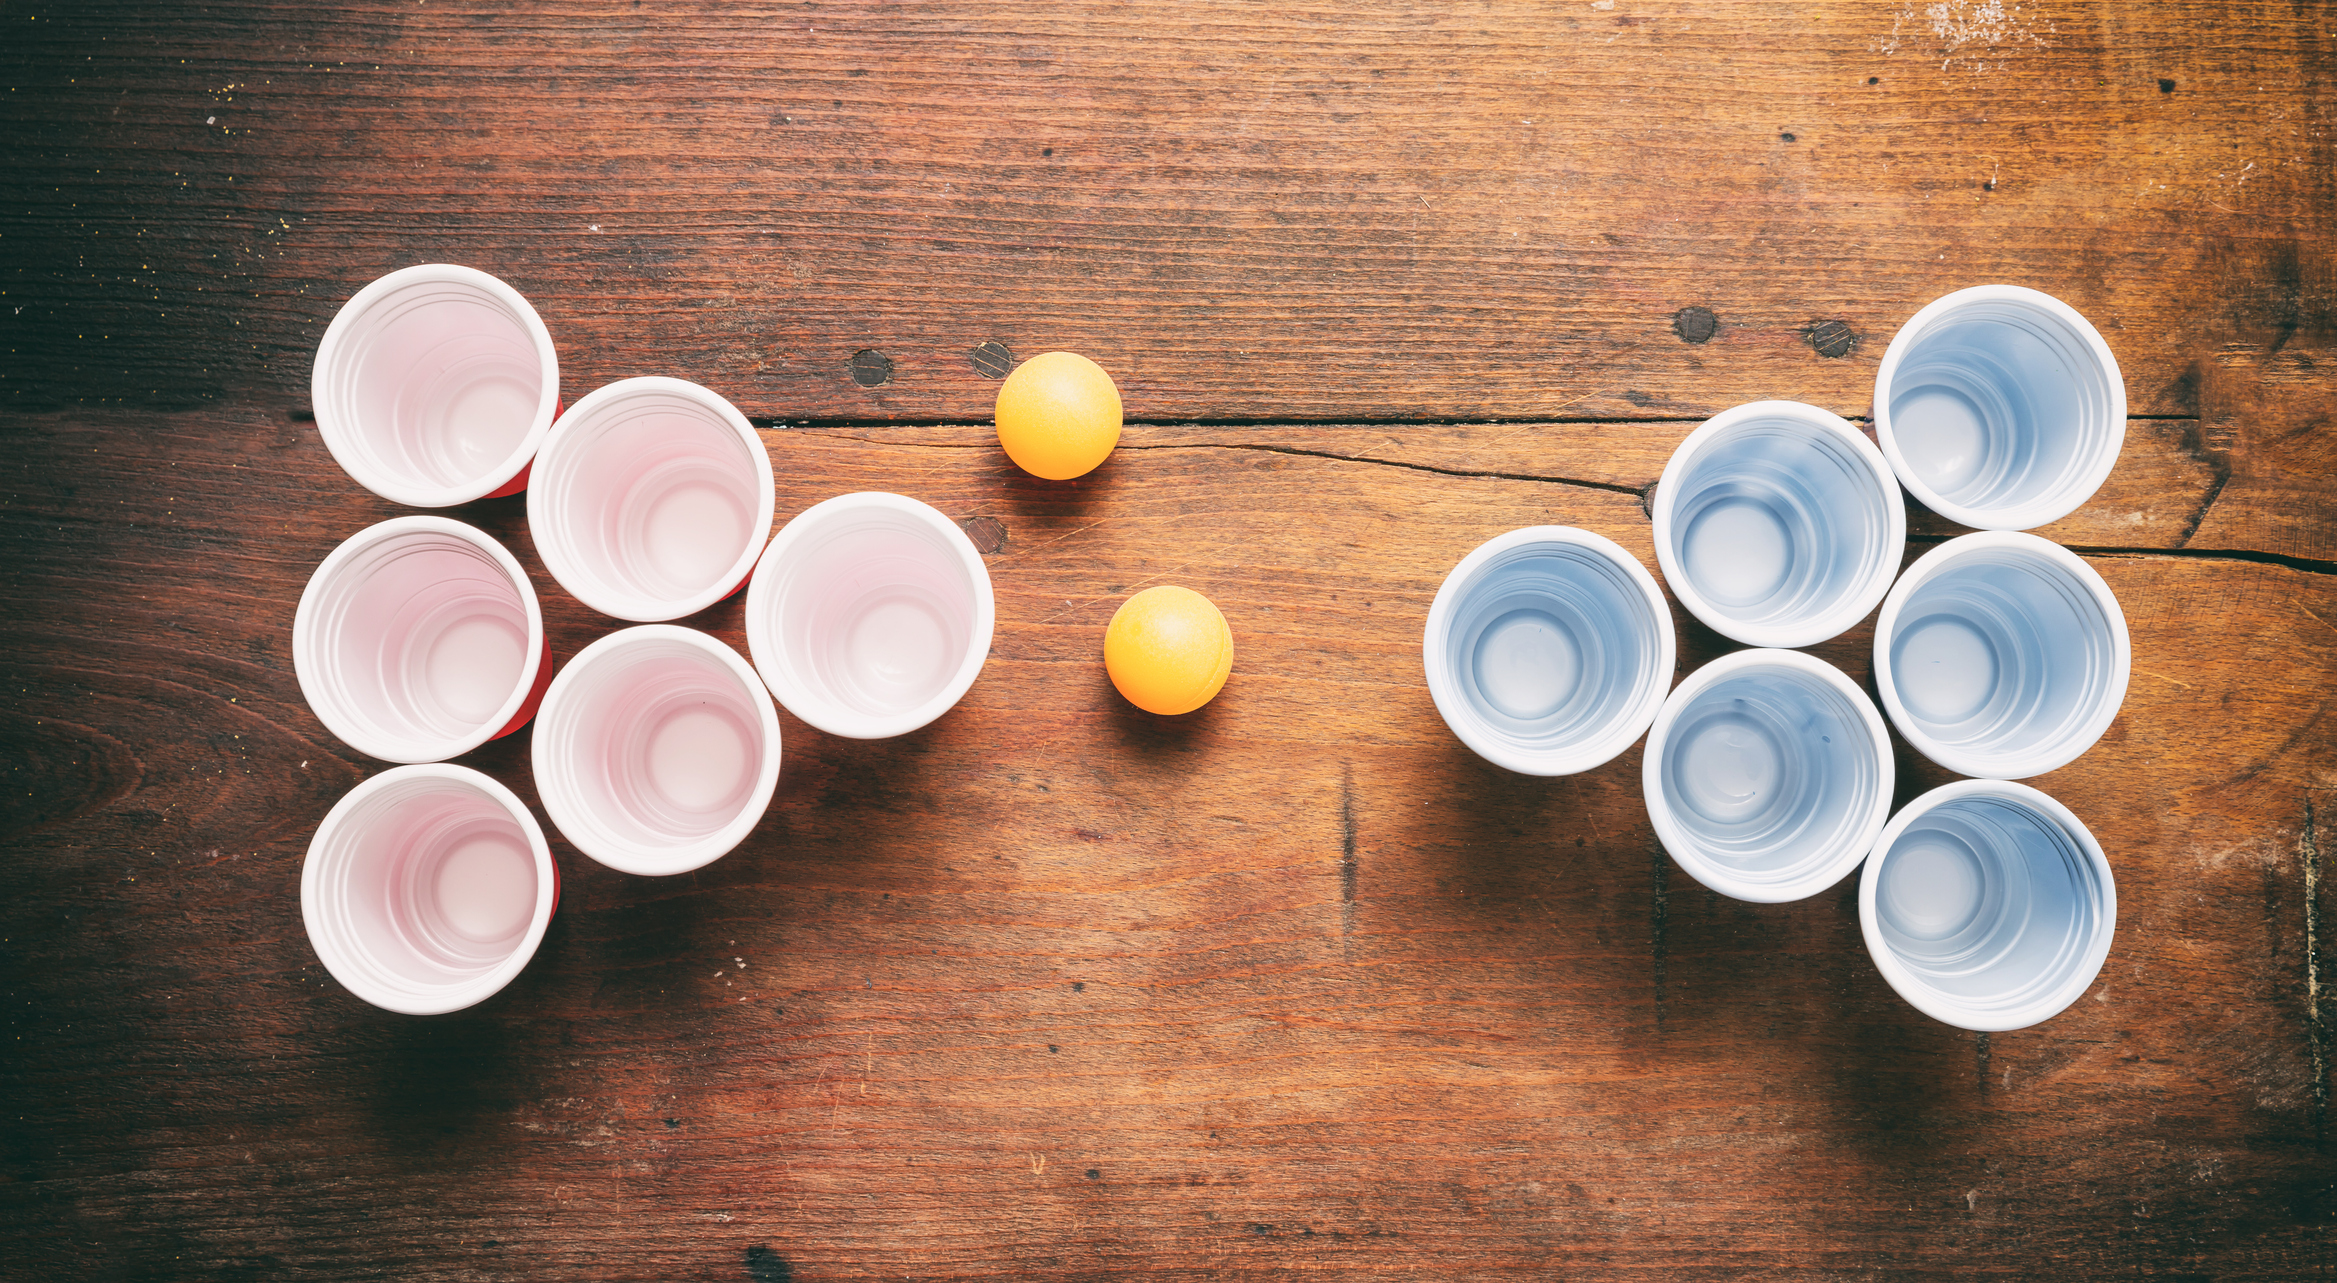 Regional Beer Pong Rules & Games: Which One is Absolute Garbage? - Rogue  Nicotine